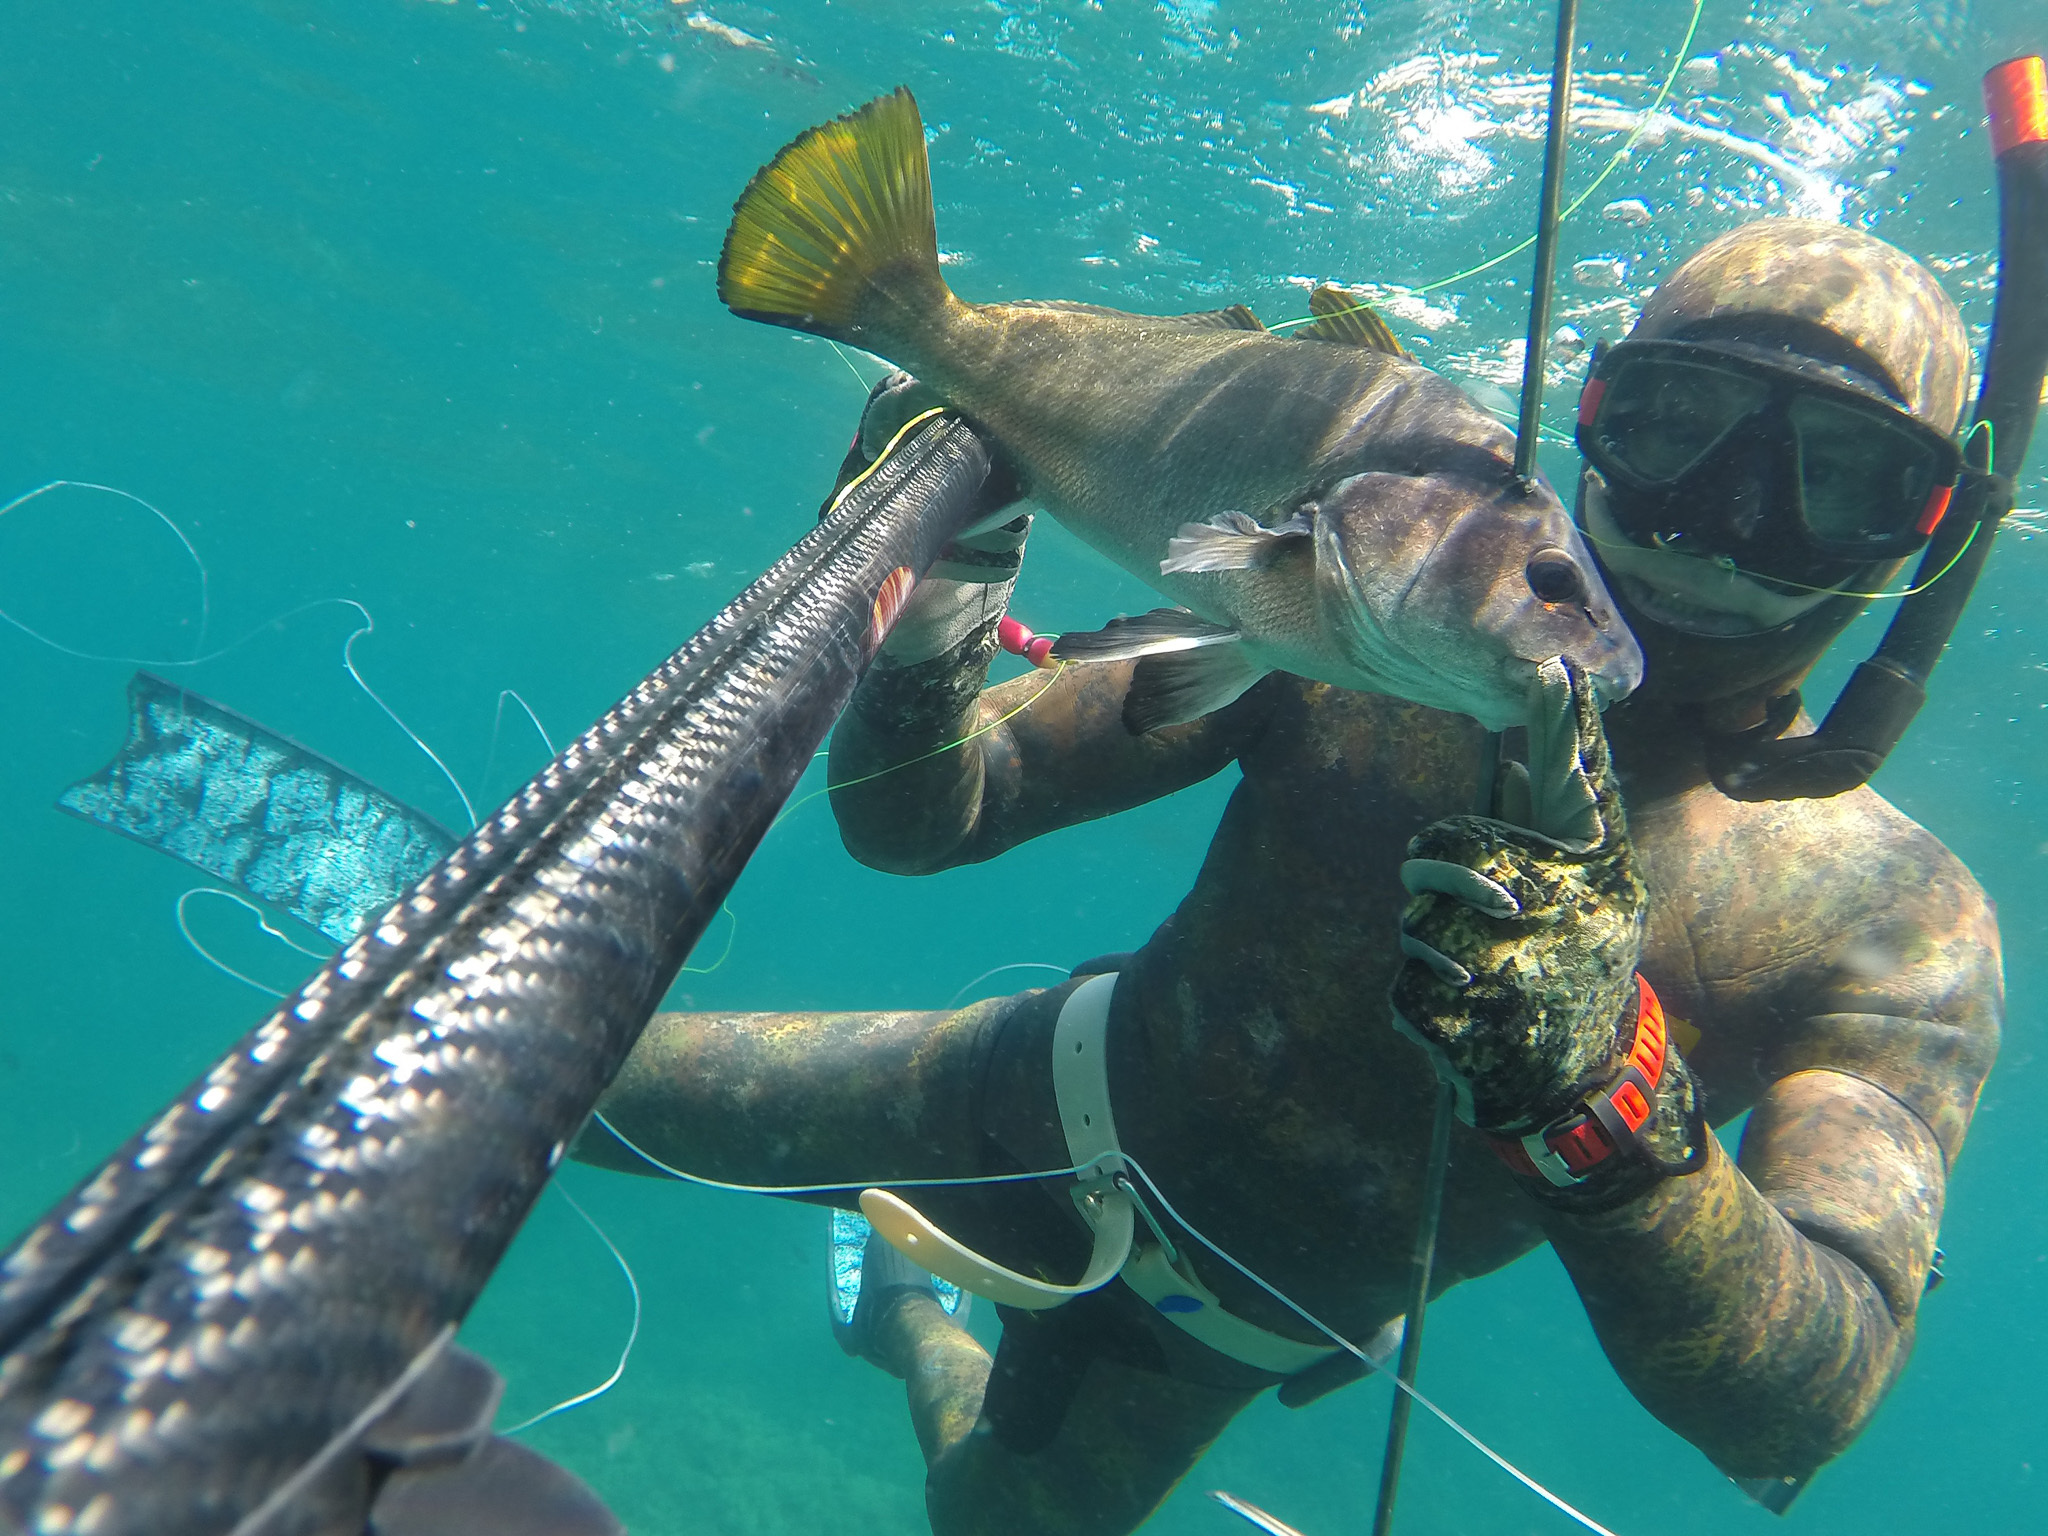 A spearfisherman holds a small fish on a spear.